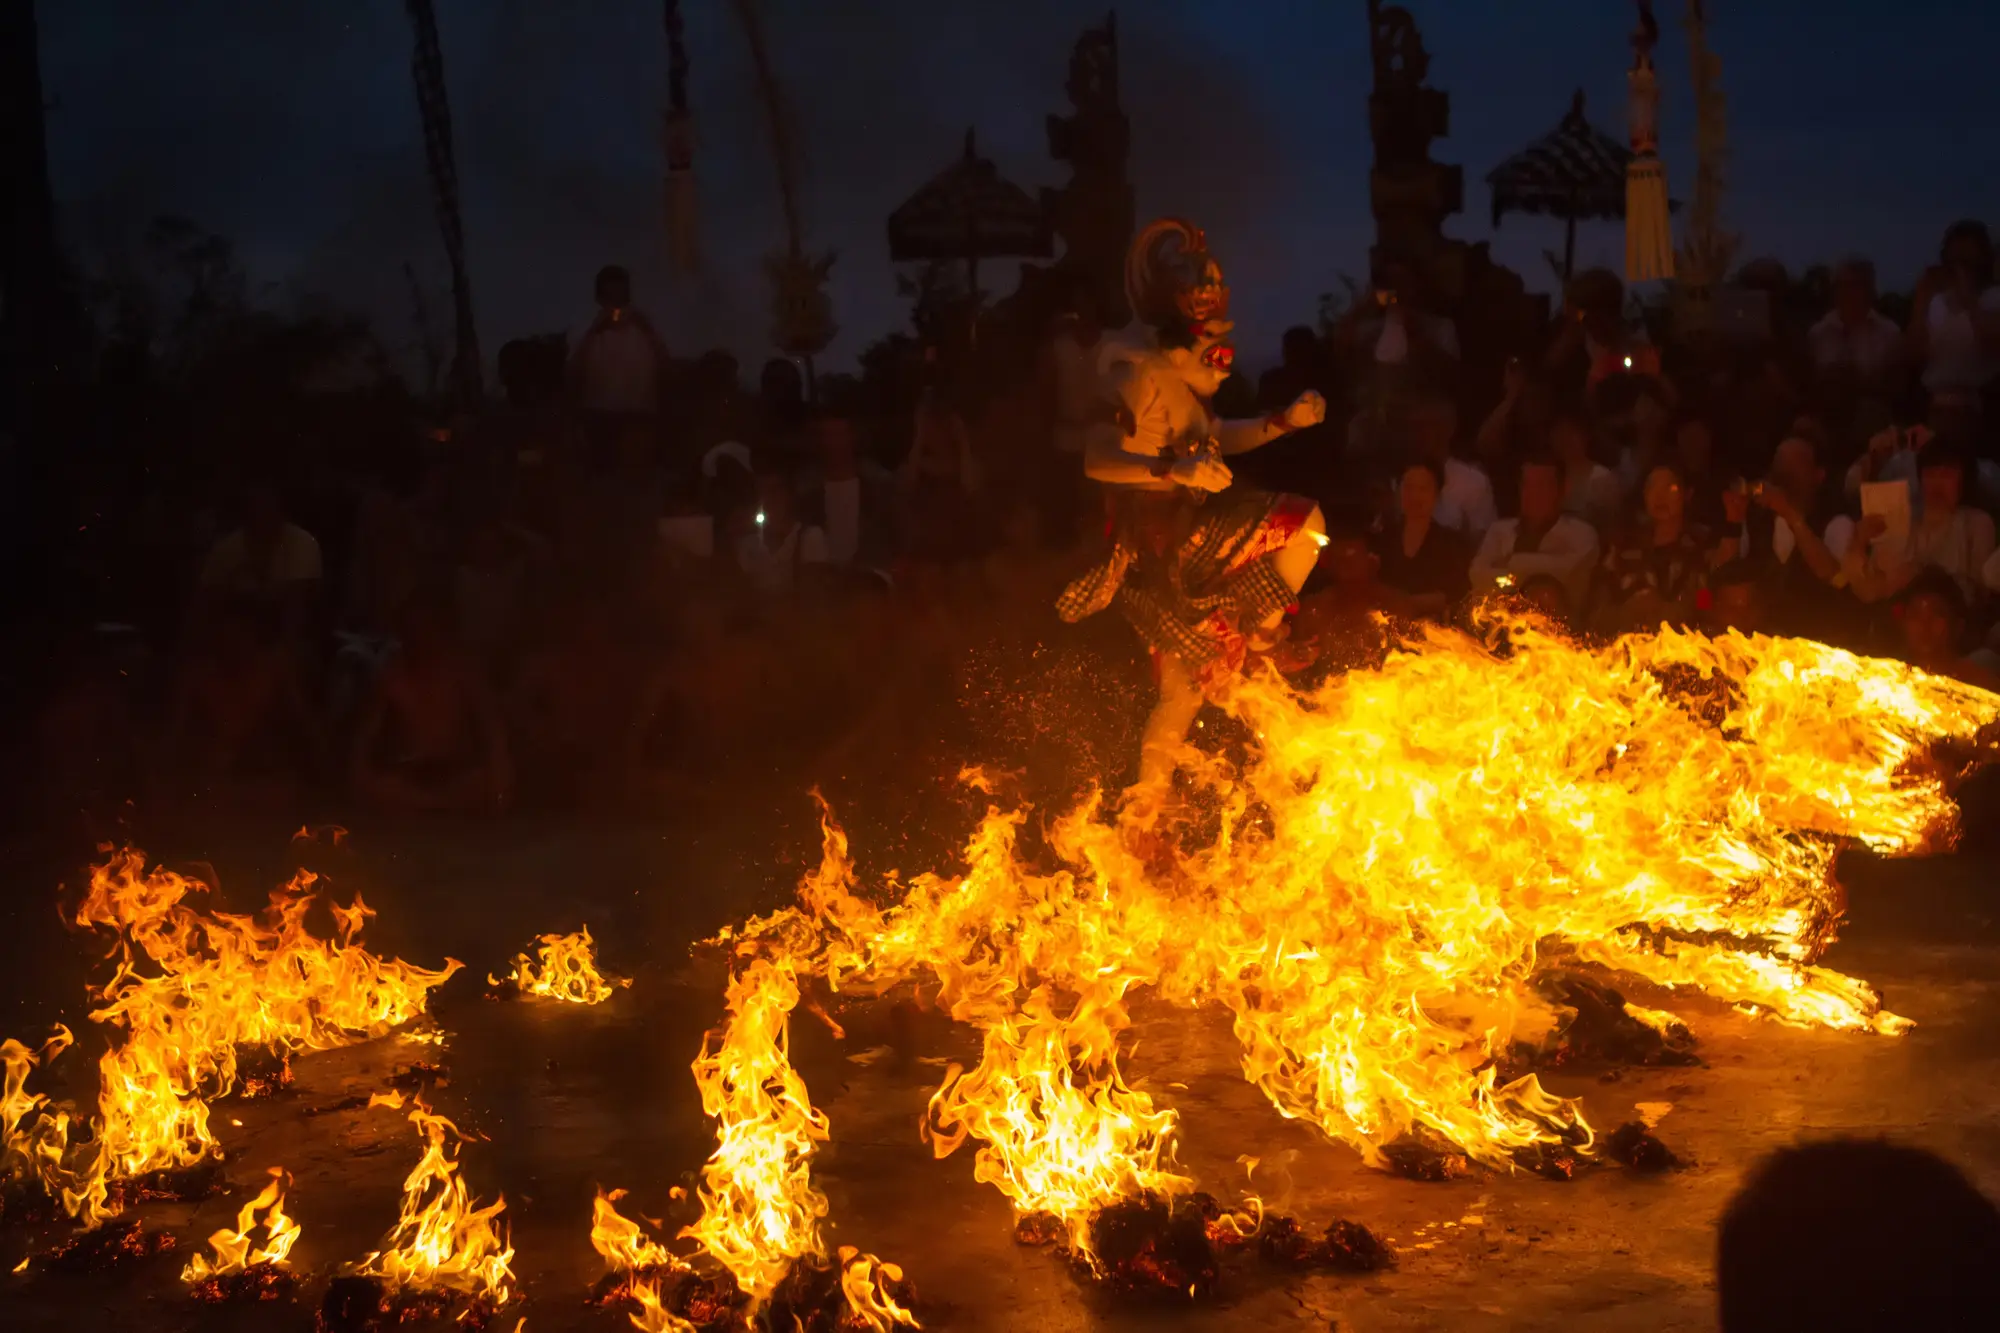 Traditional Balinese Kecak Fire Dancer standing in a ring of fire at Uluwatu Temple in Bali.